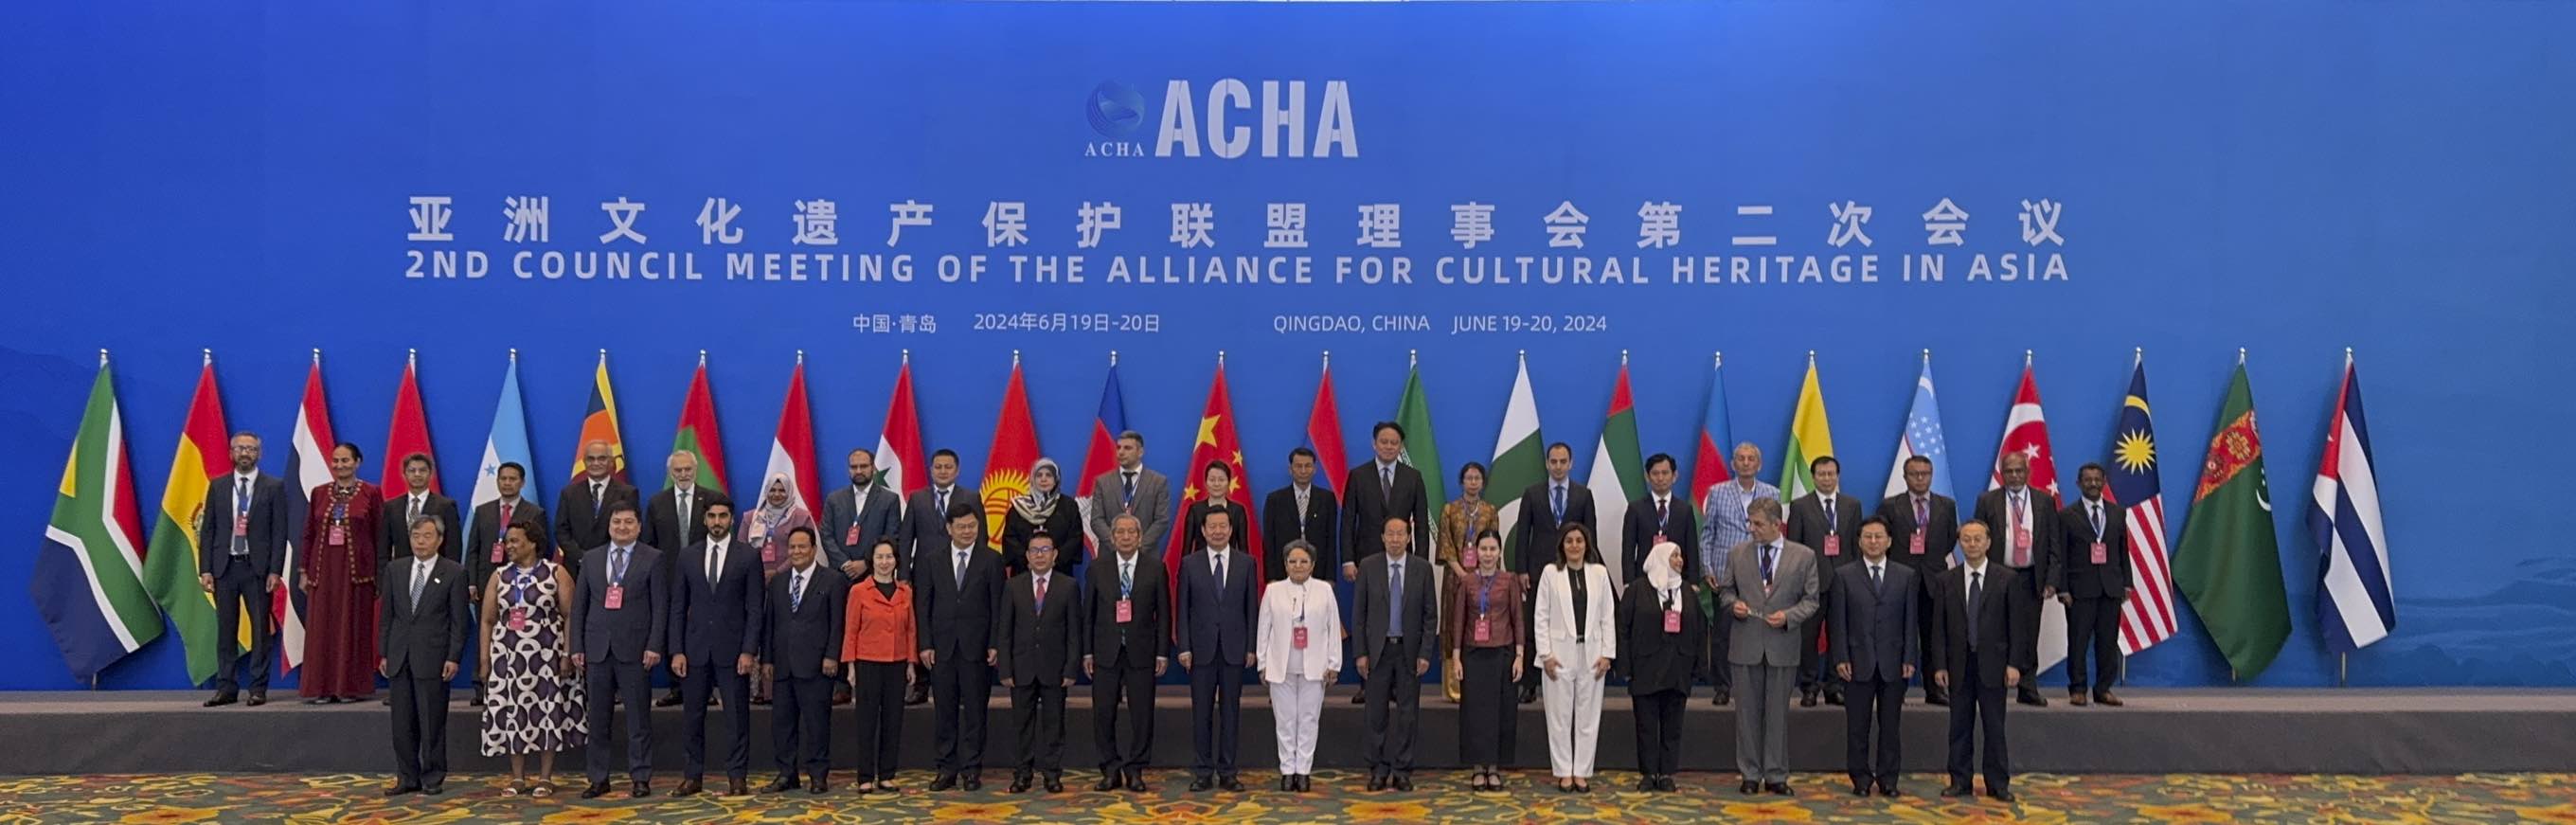 2nd Council Meeting of the Alliance for Cultural Heritage In Asia   Qingdao 